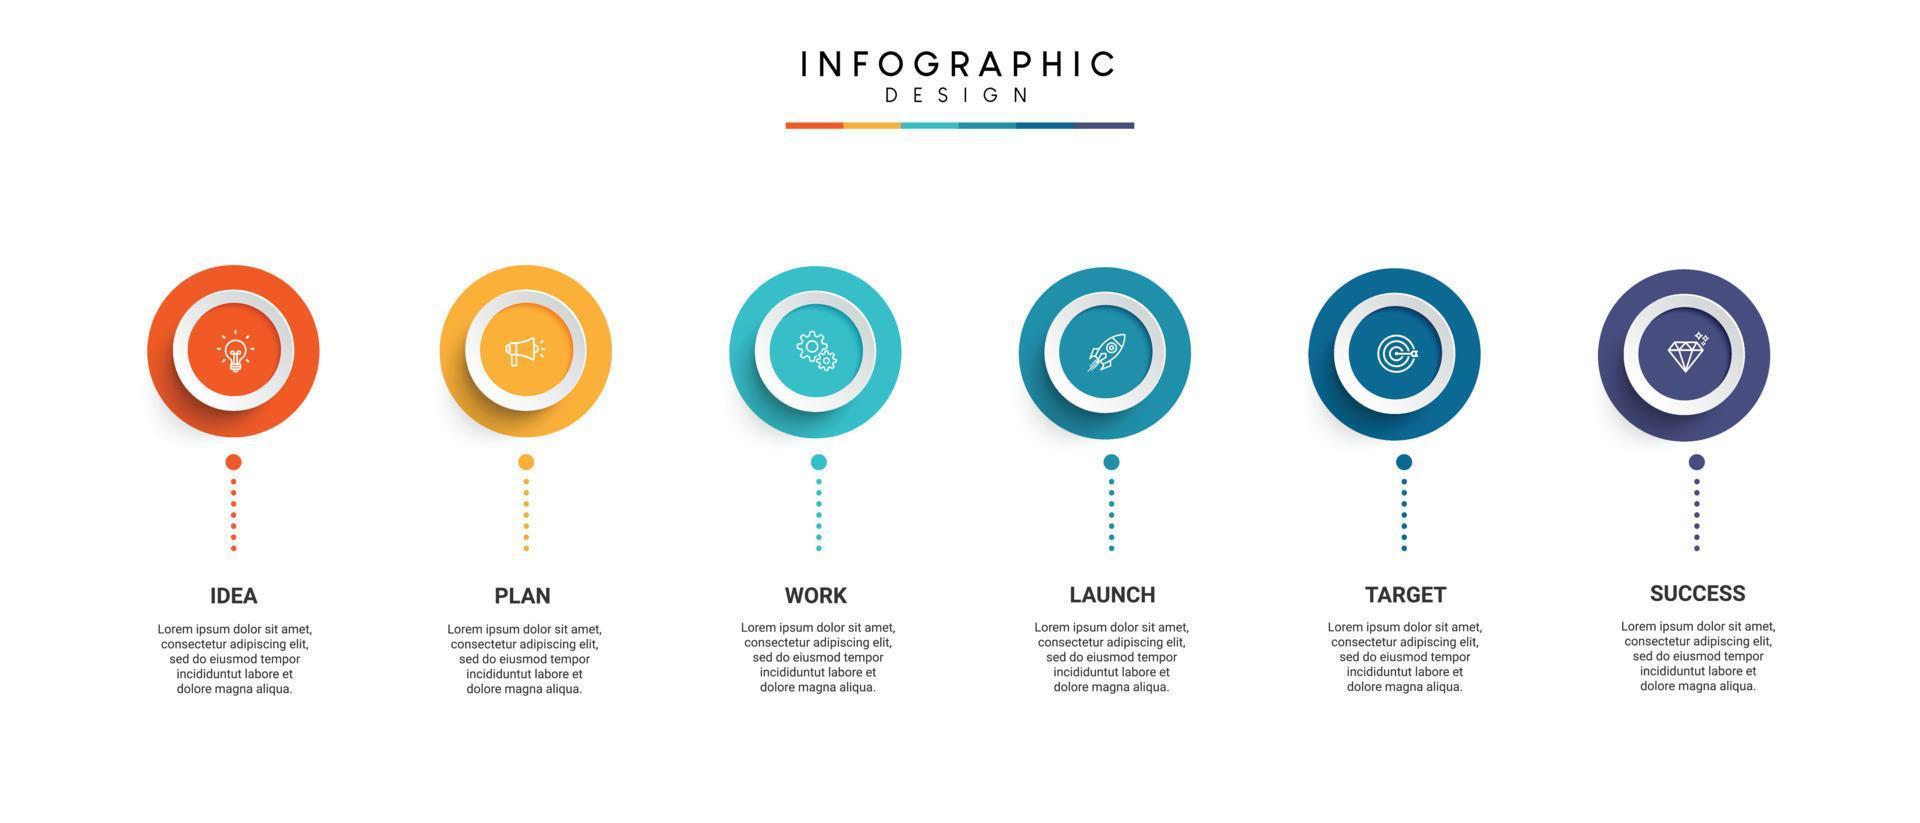 Steps business timeline process infographic template design with icons vector